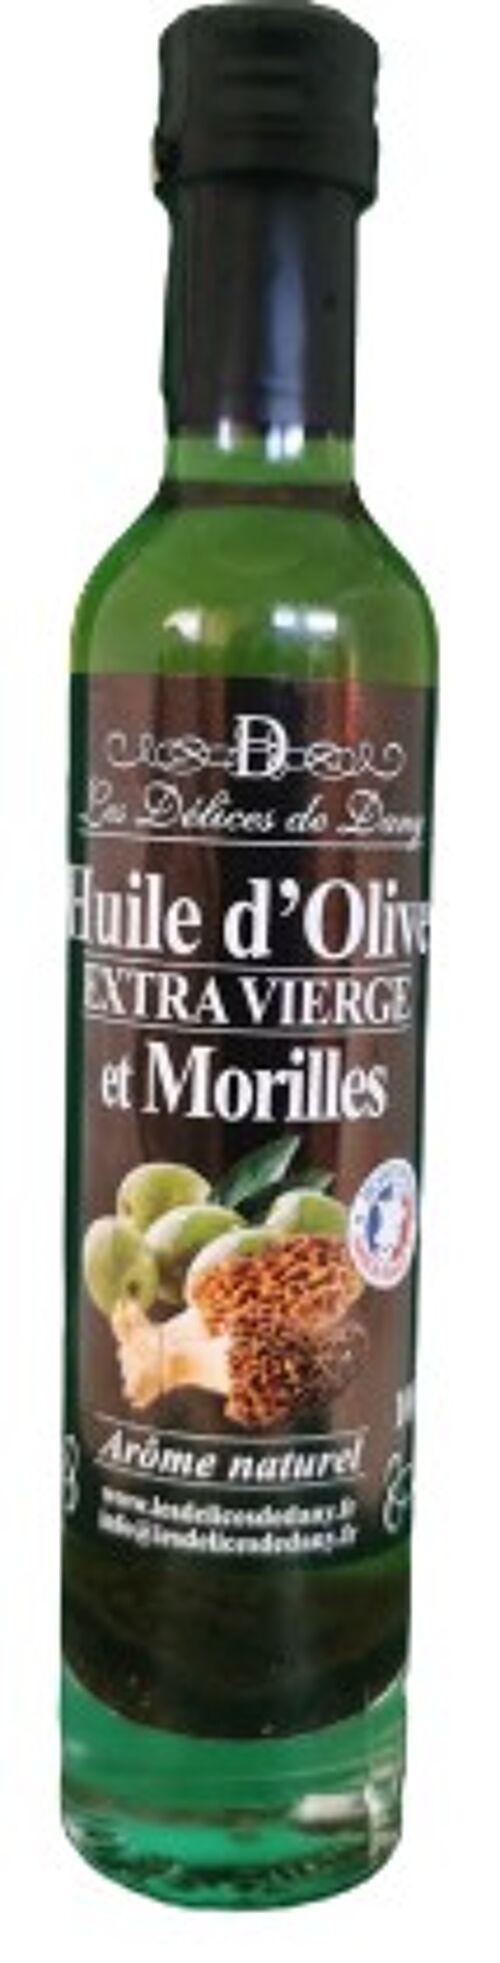 Huile d'olive vierge extra aux morilles